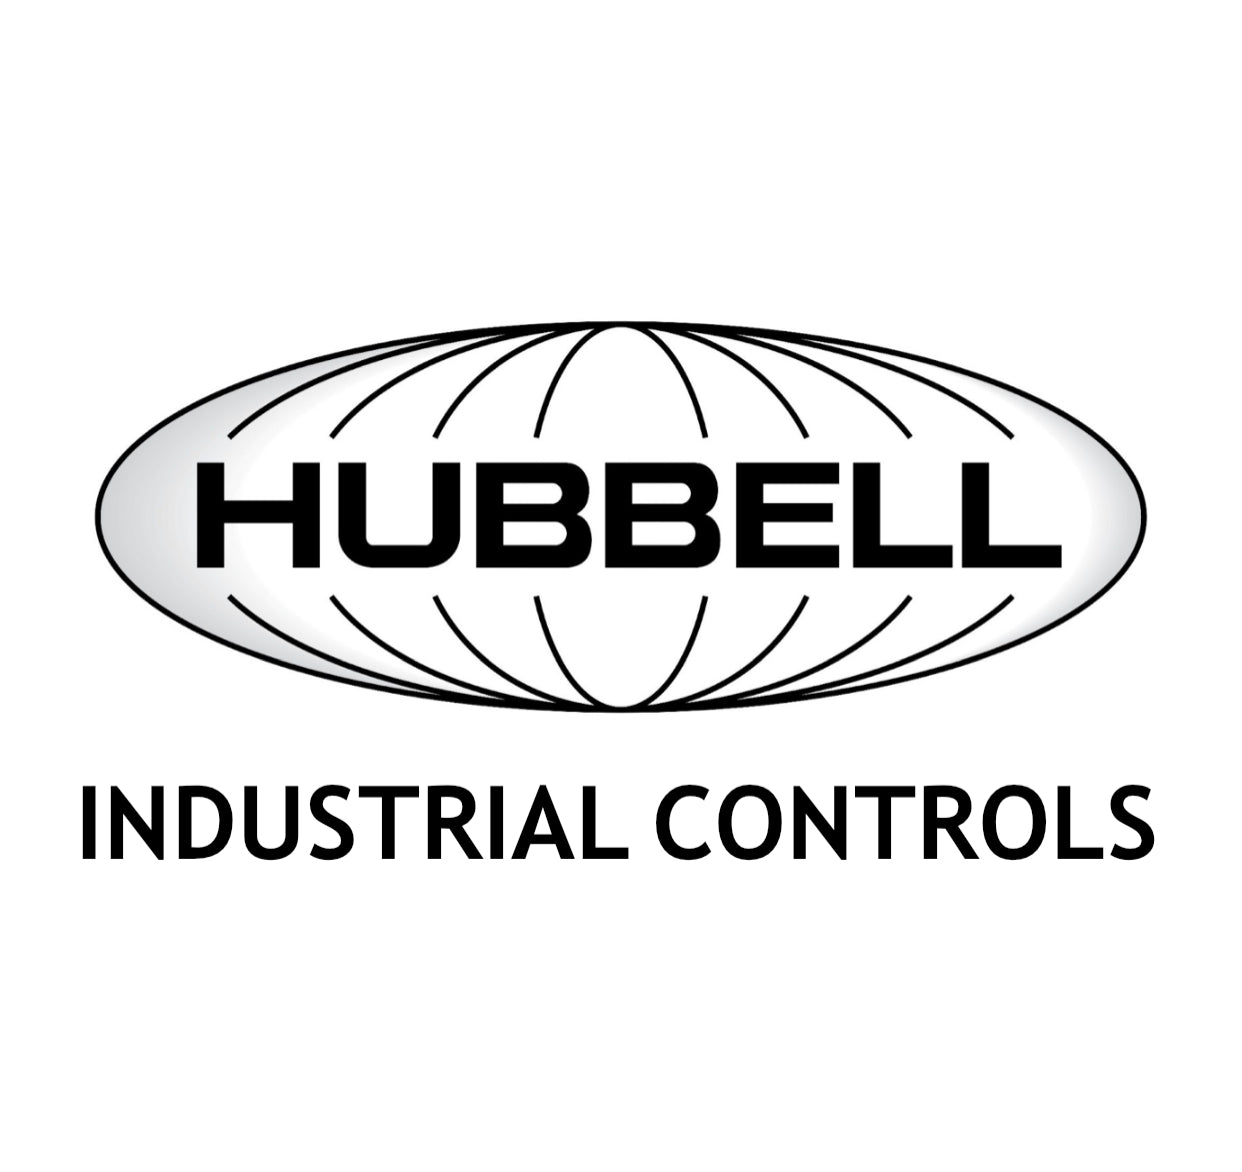 HUBBELL INDUSTRIAL CONTROLS